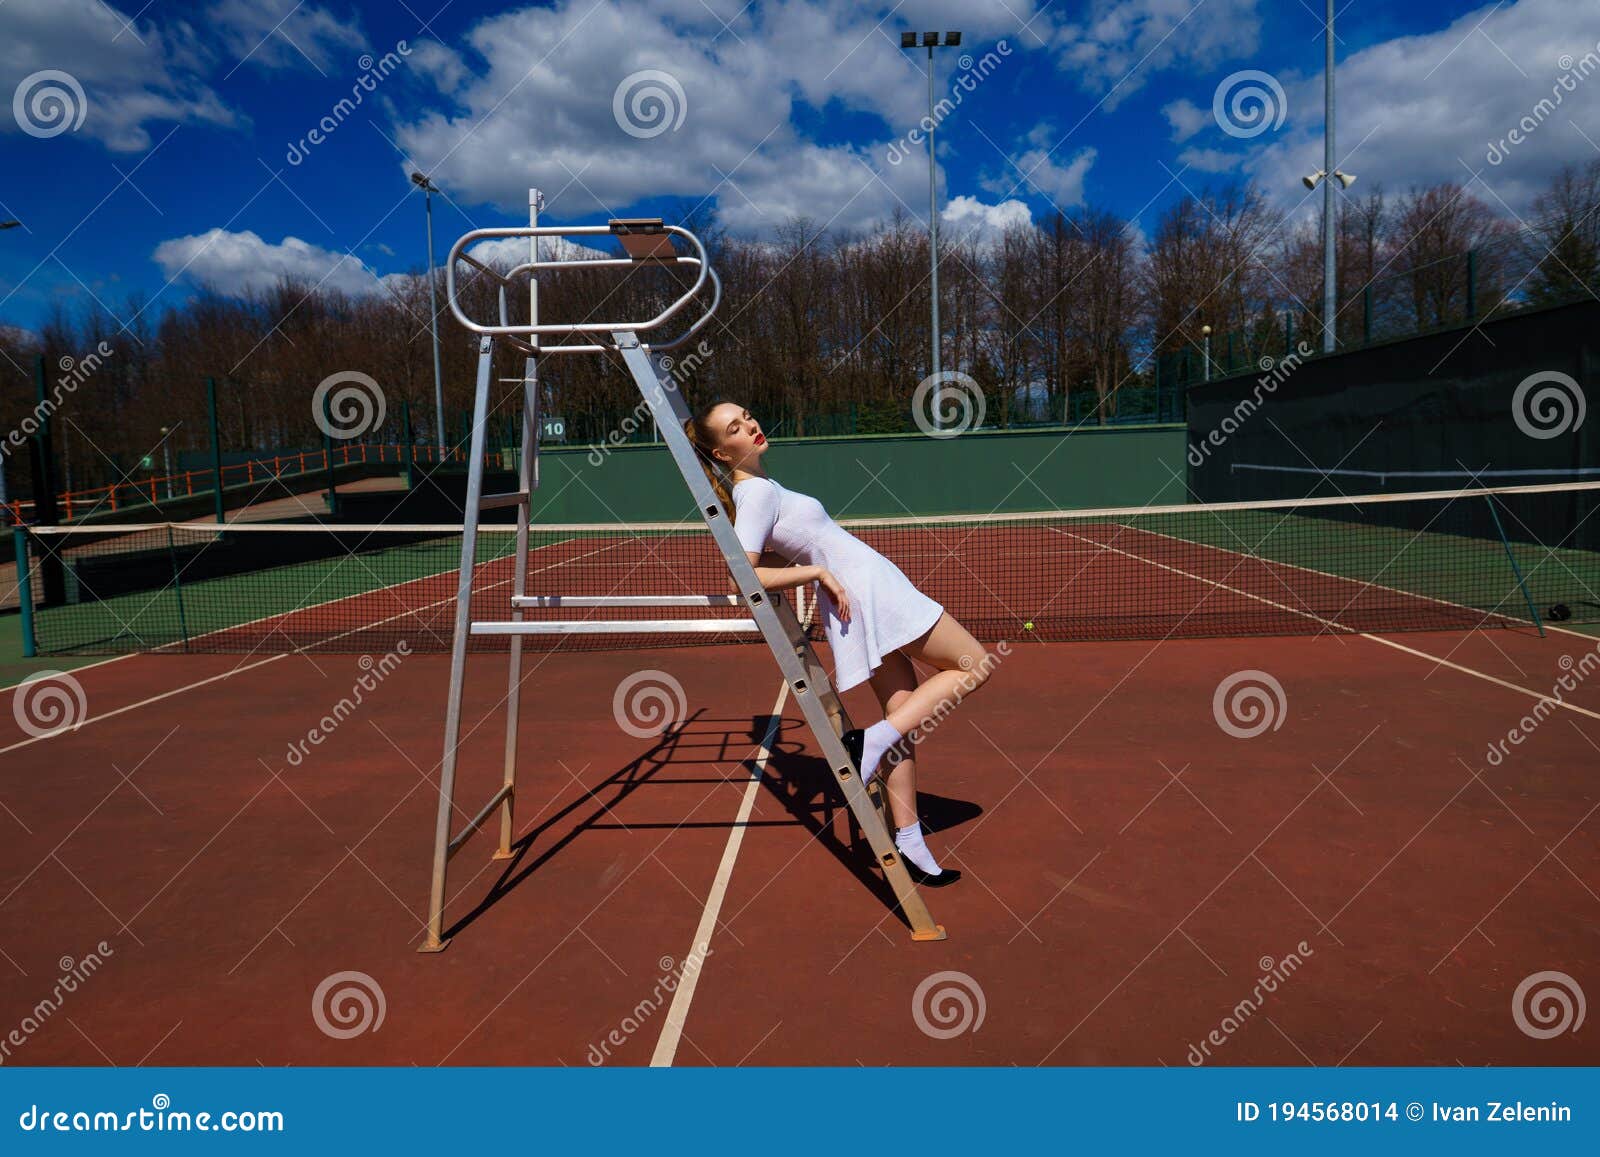 Young Female Tennis Player on Court Near the Referee`s Ladder Stock Photo - Image of clothing, ball: 194568014